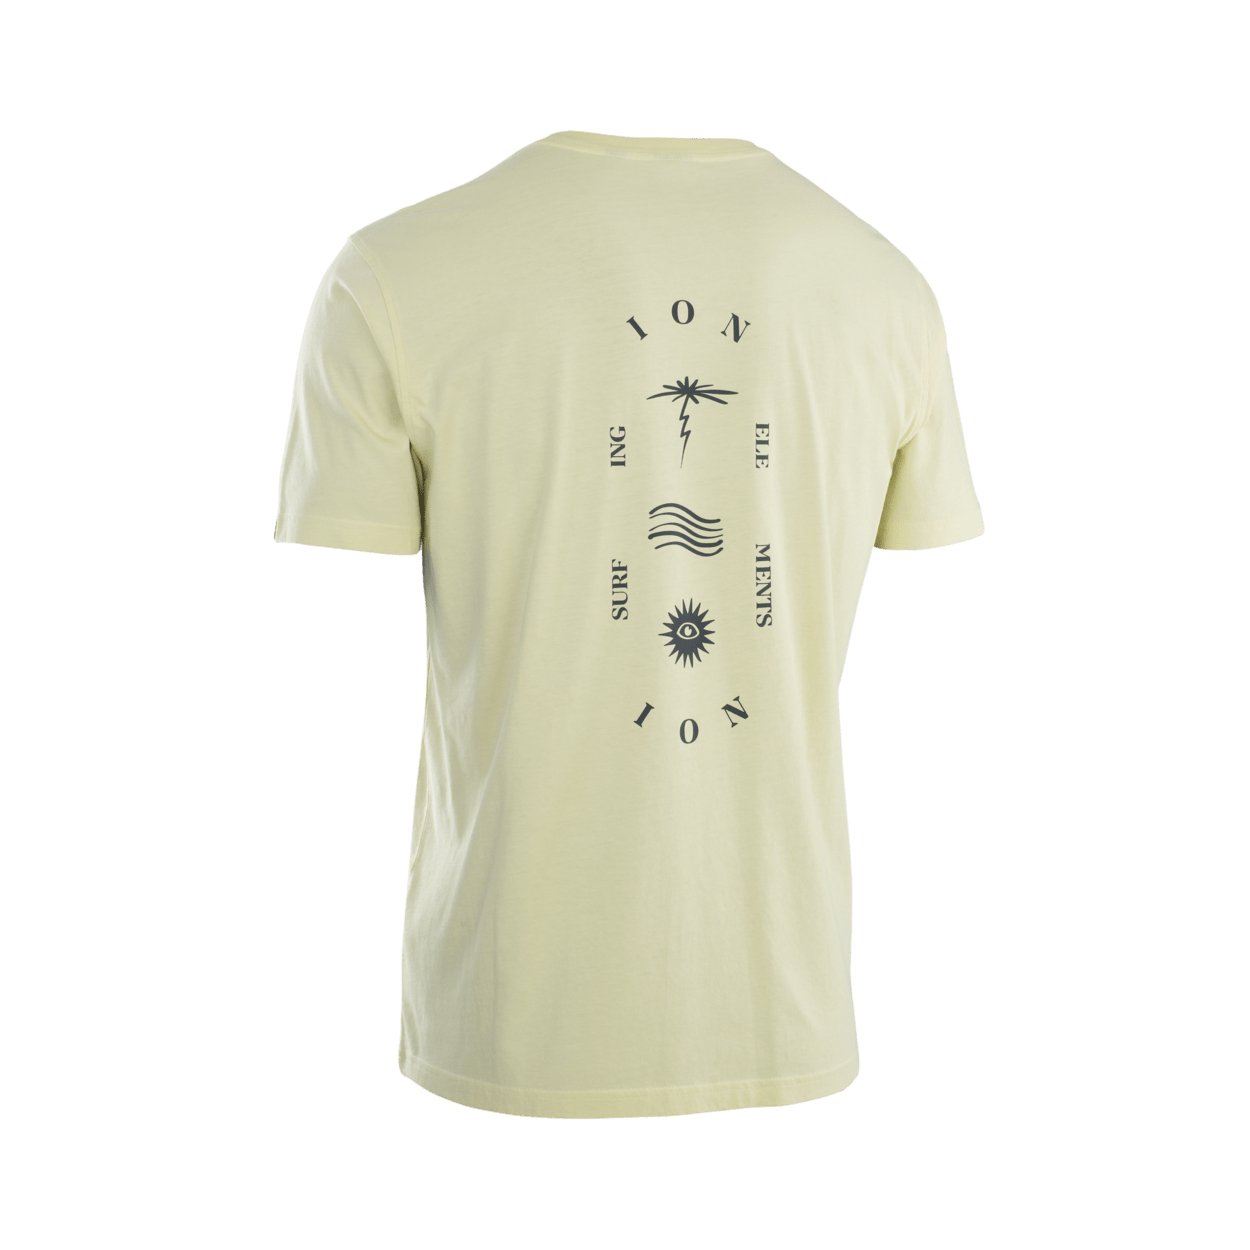 ION Tee Vibes SS men 2023 - Worthing Watersports - 9010583102757 - Apparel - ION Bike